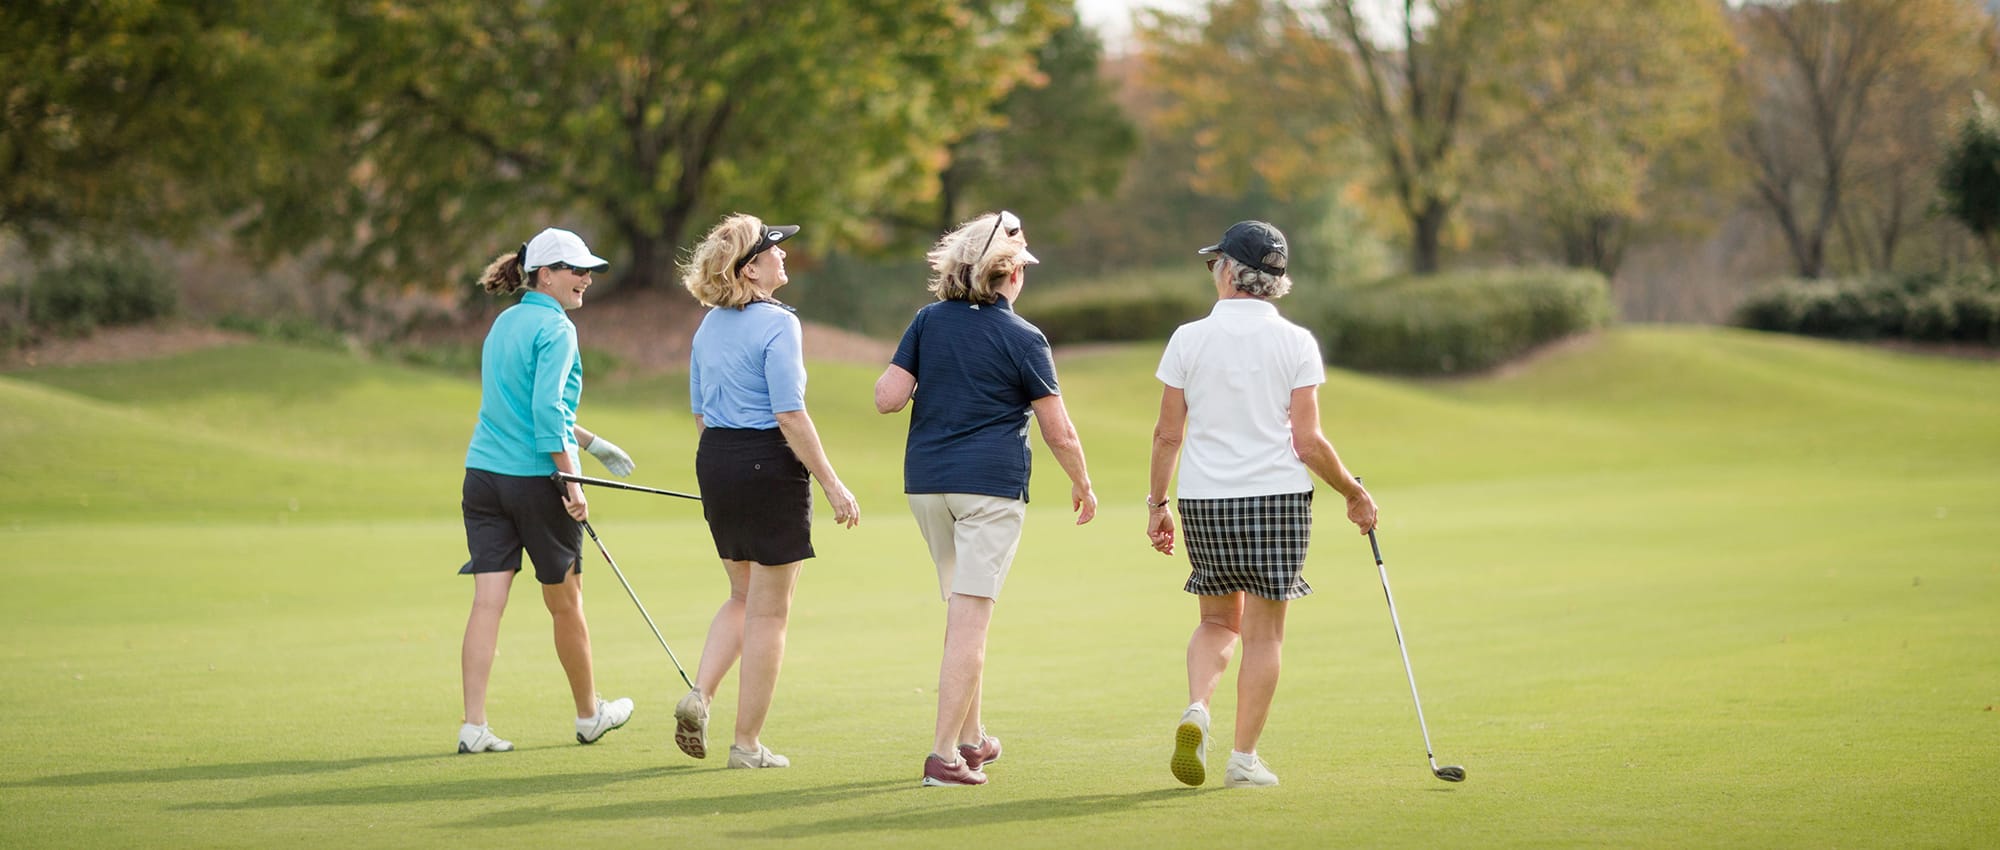 Golf Tournament Gifts For Women